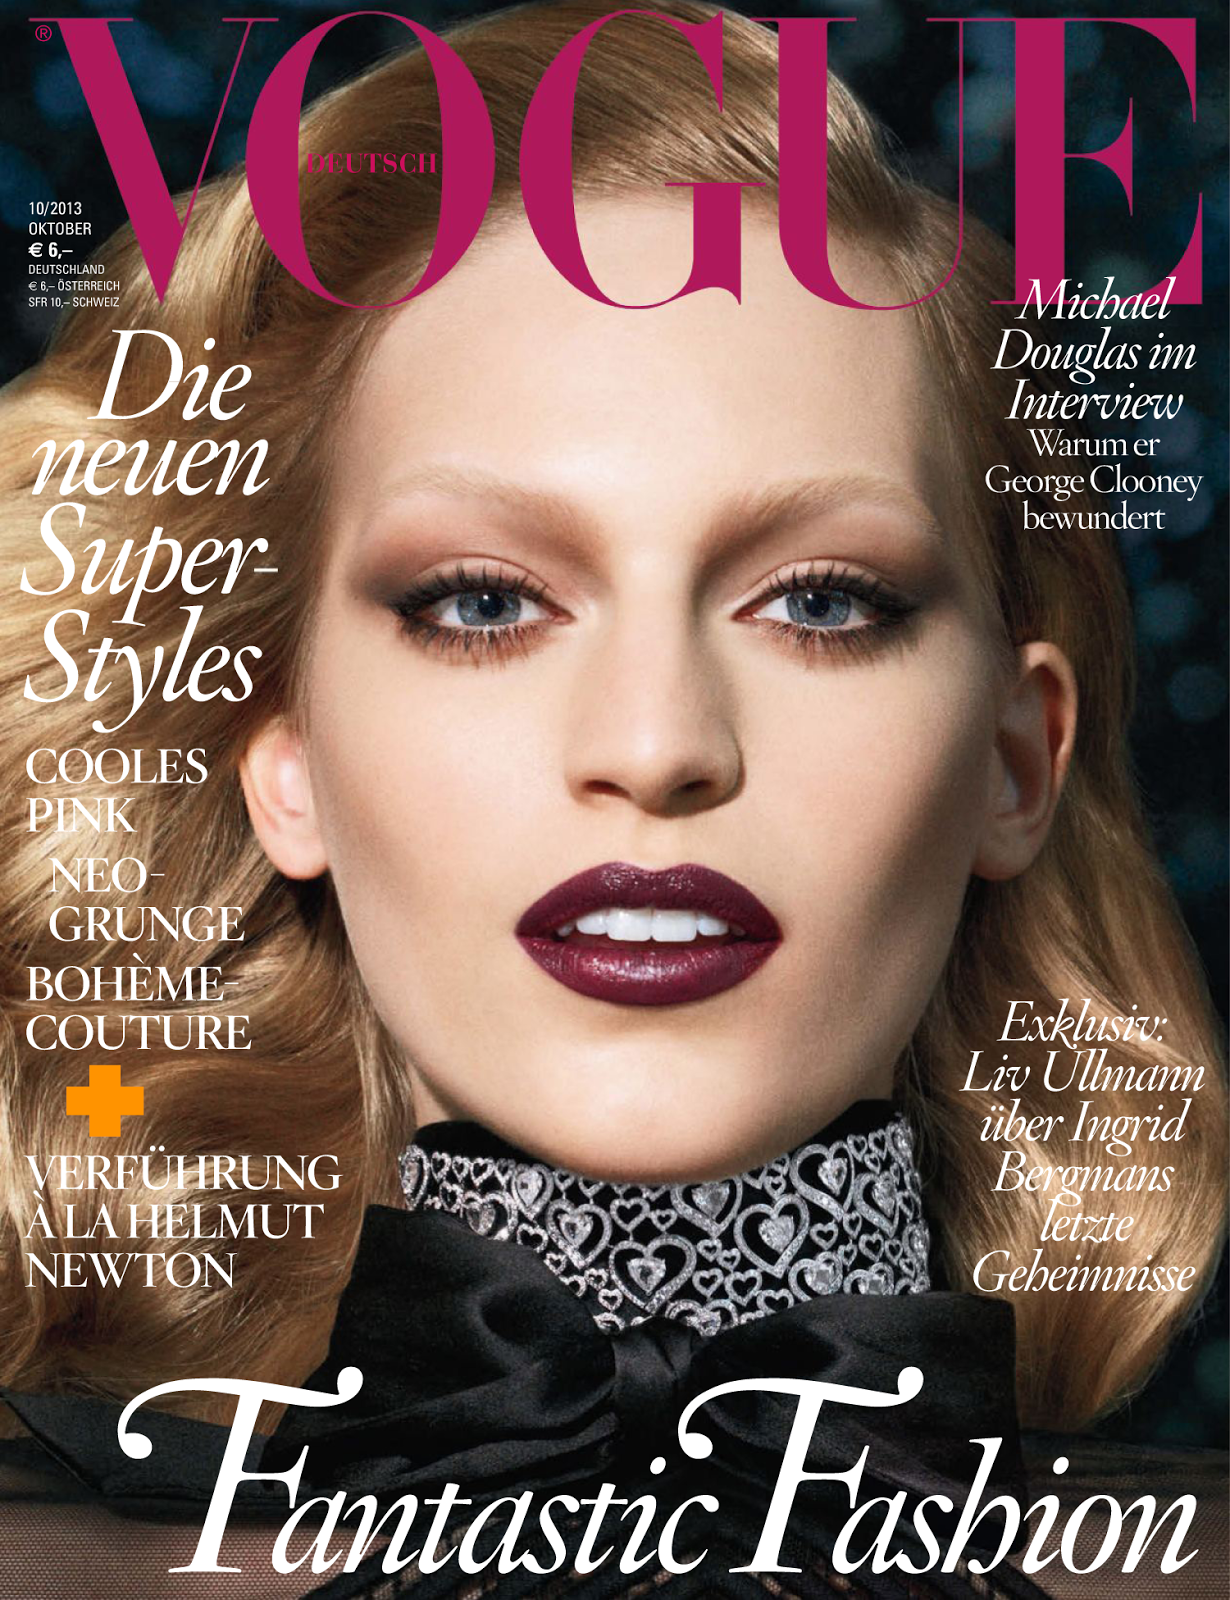 Vogue's Covers: Vogue Germany